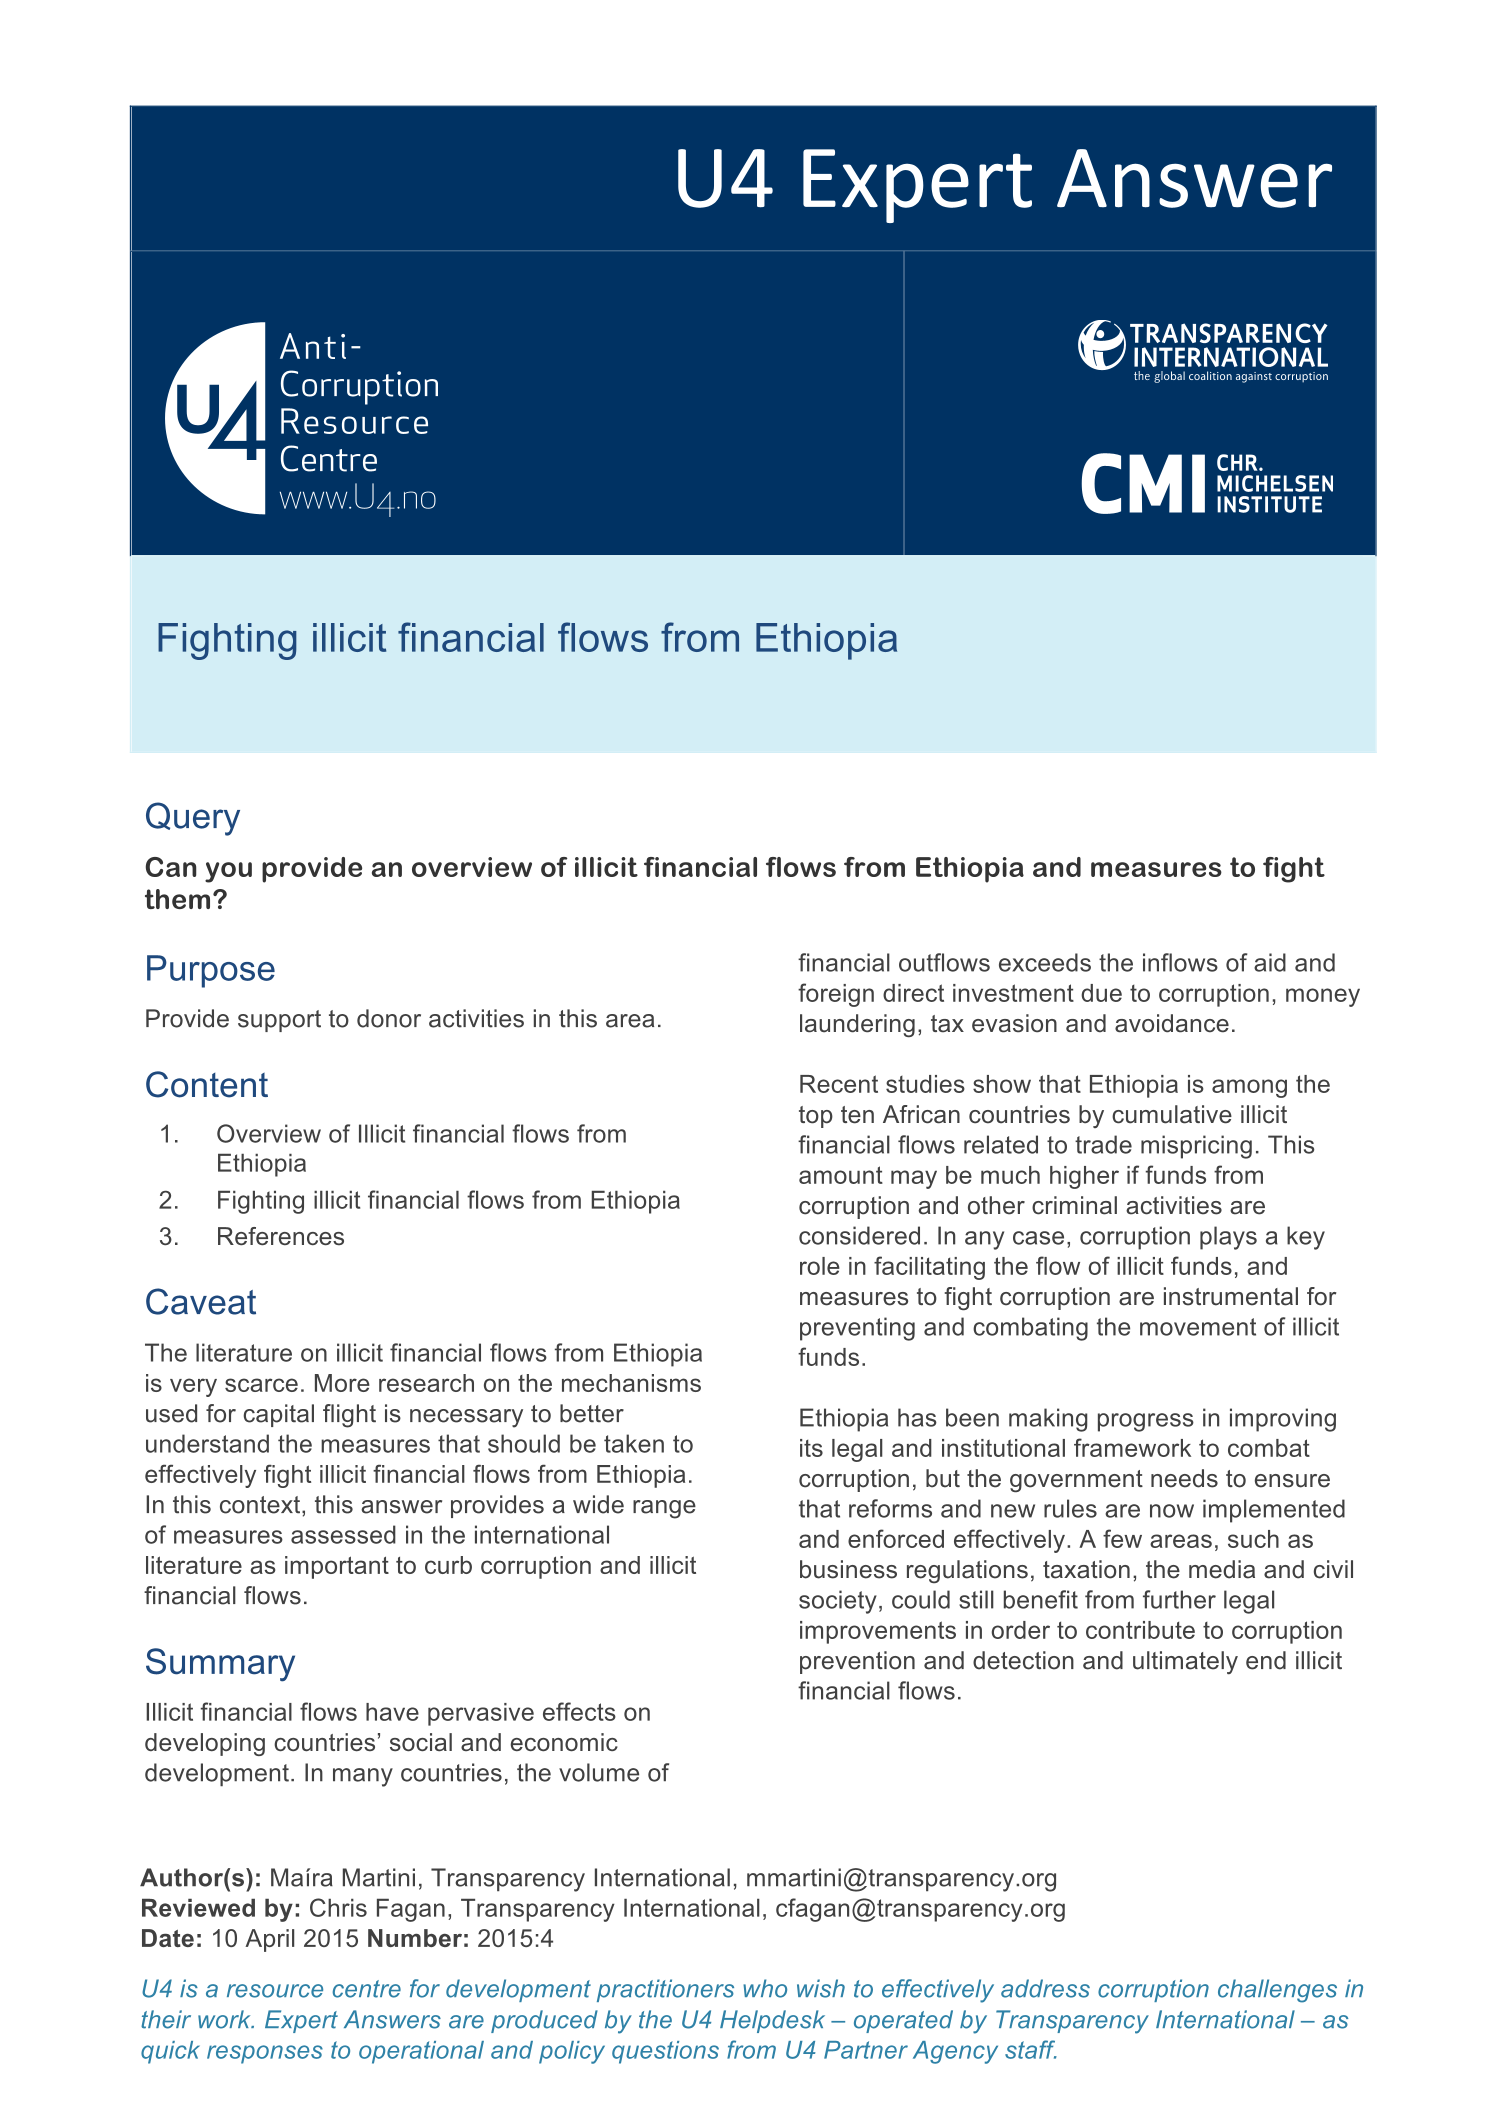 Fighting illicit financial flows from Ethiopia